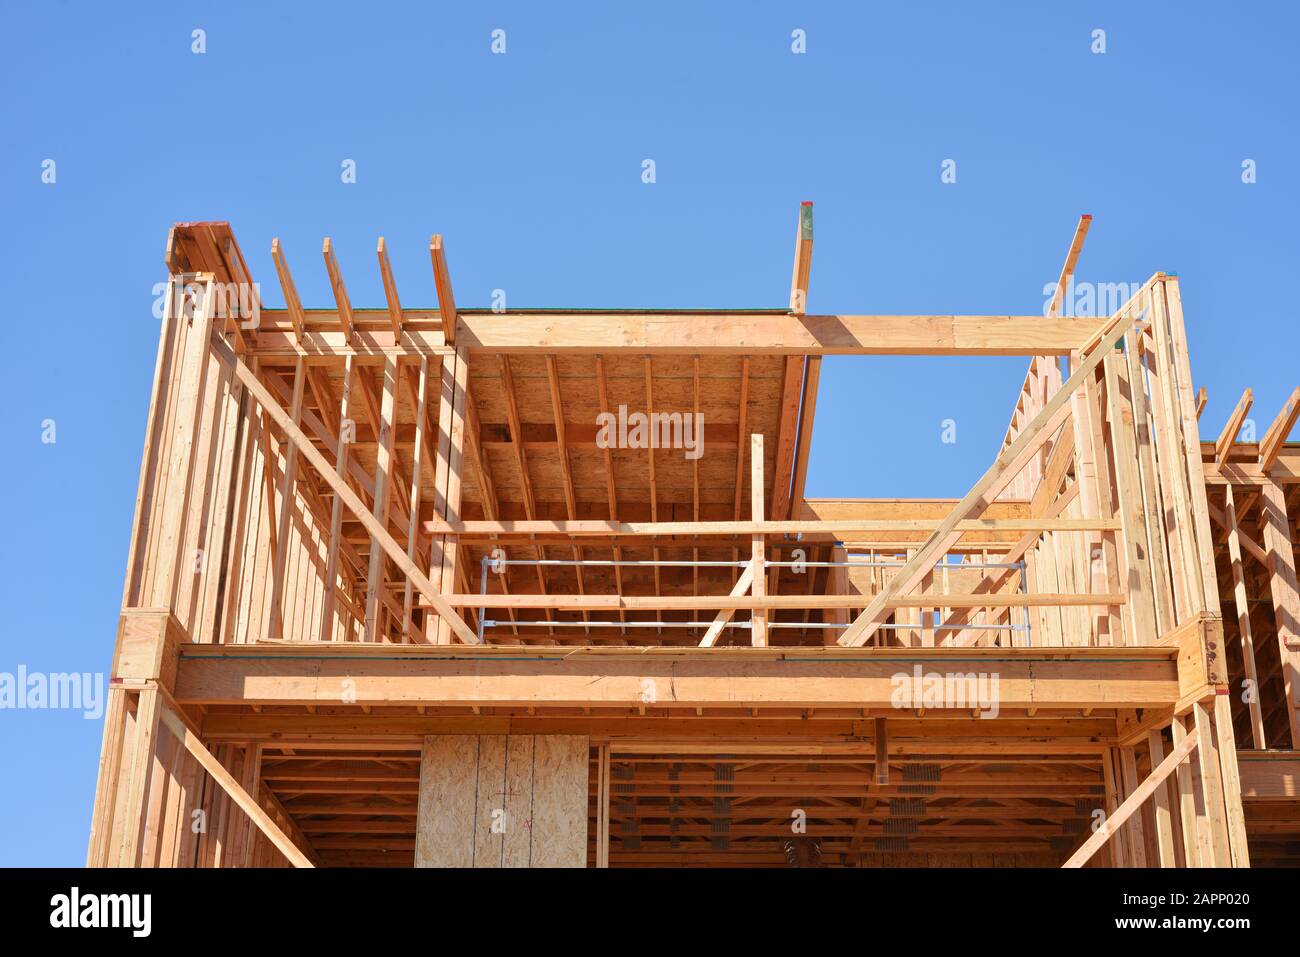 Wooden house construction, with environmental friendly natural material Stock Photo